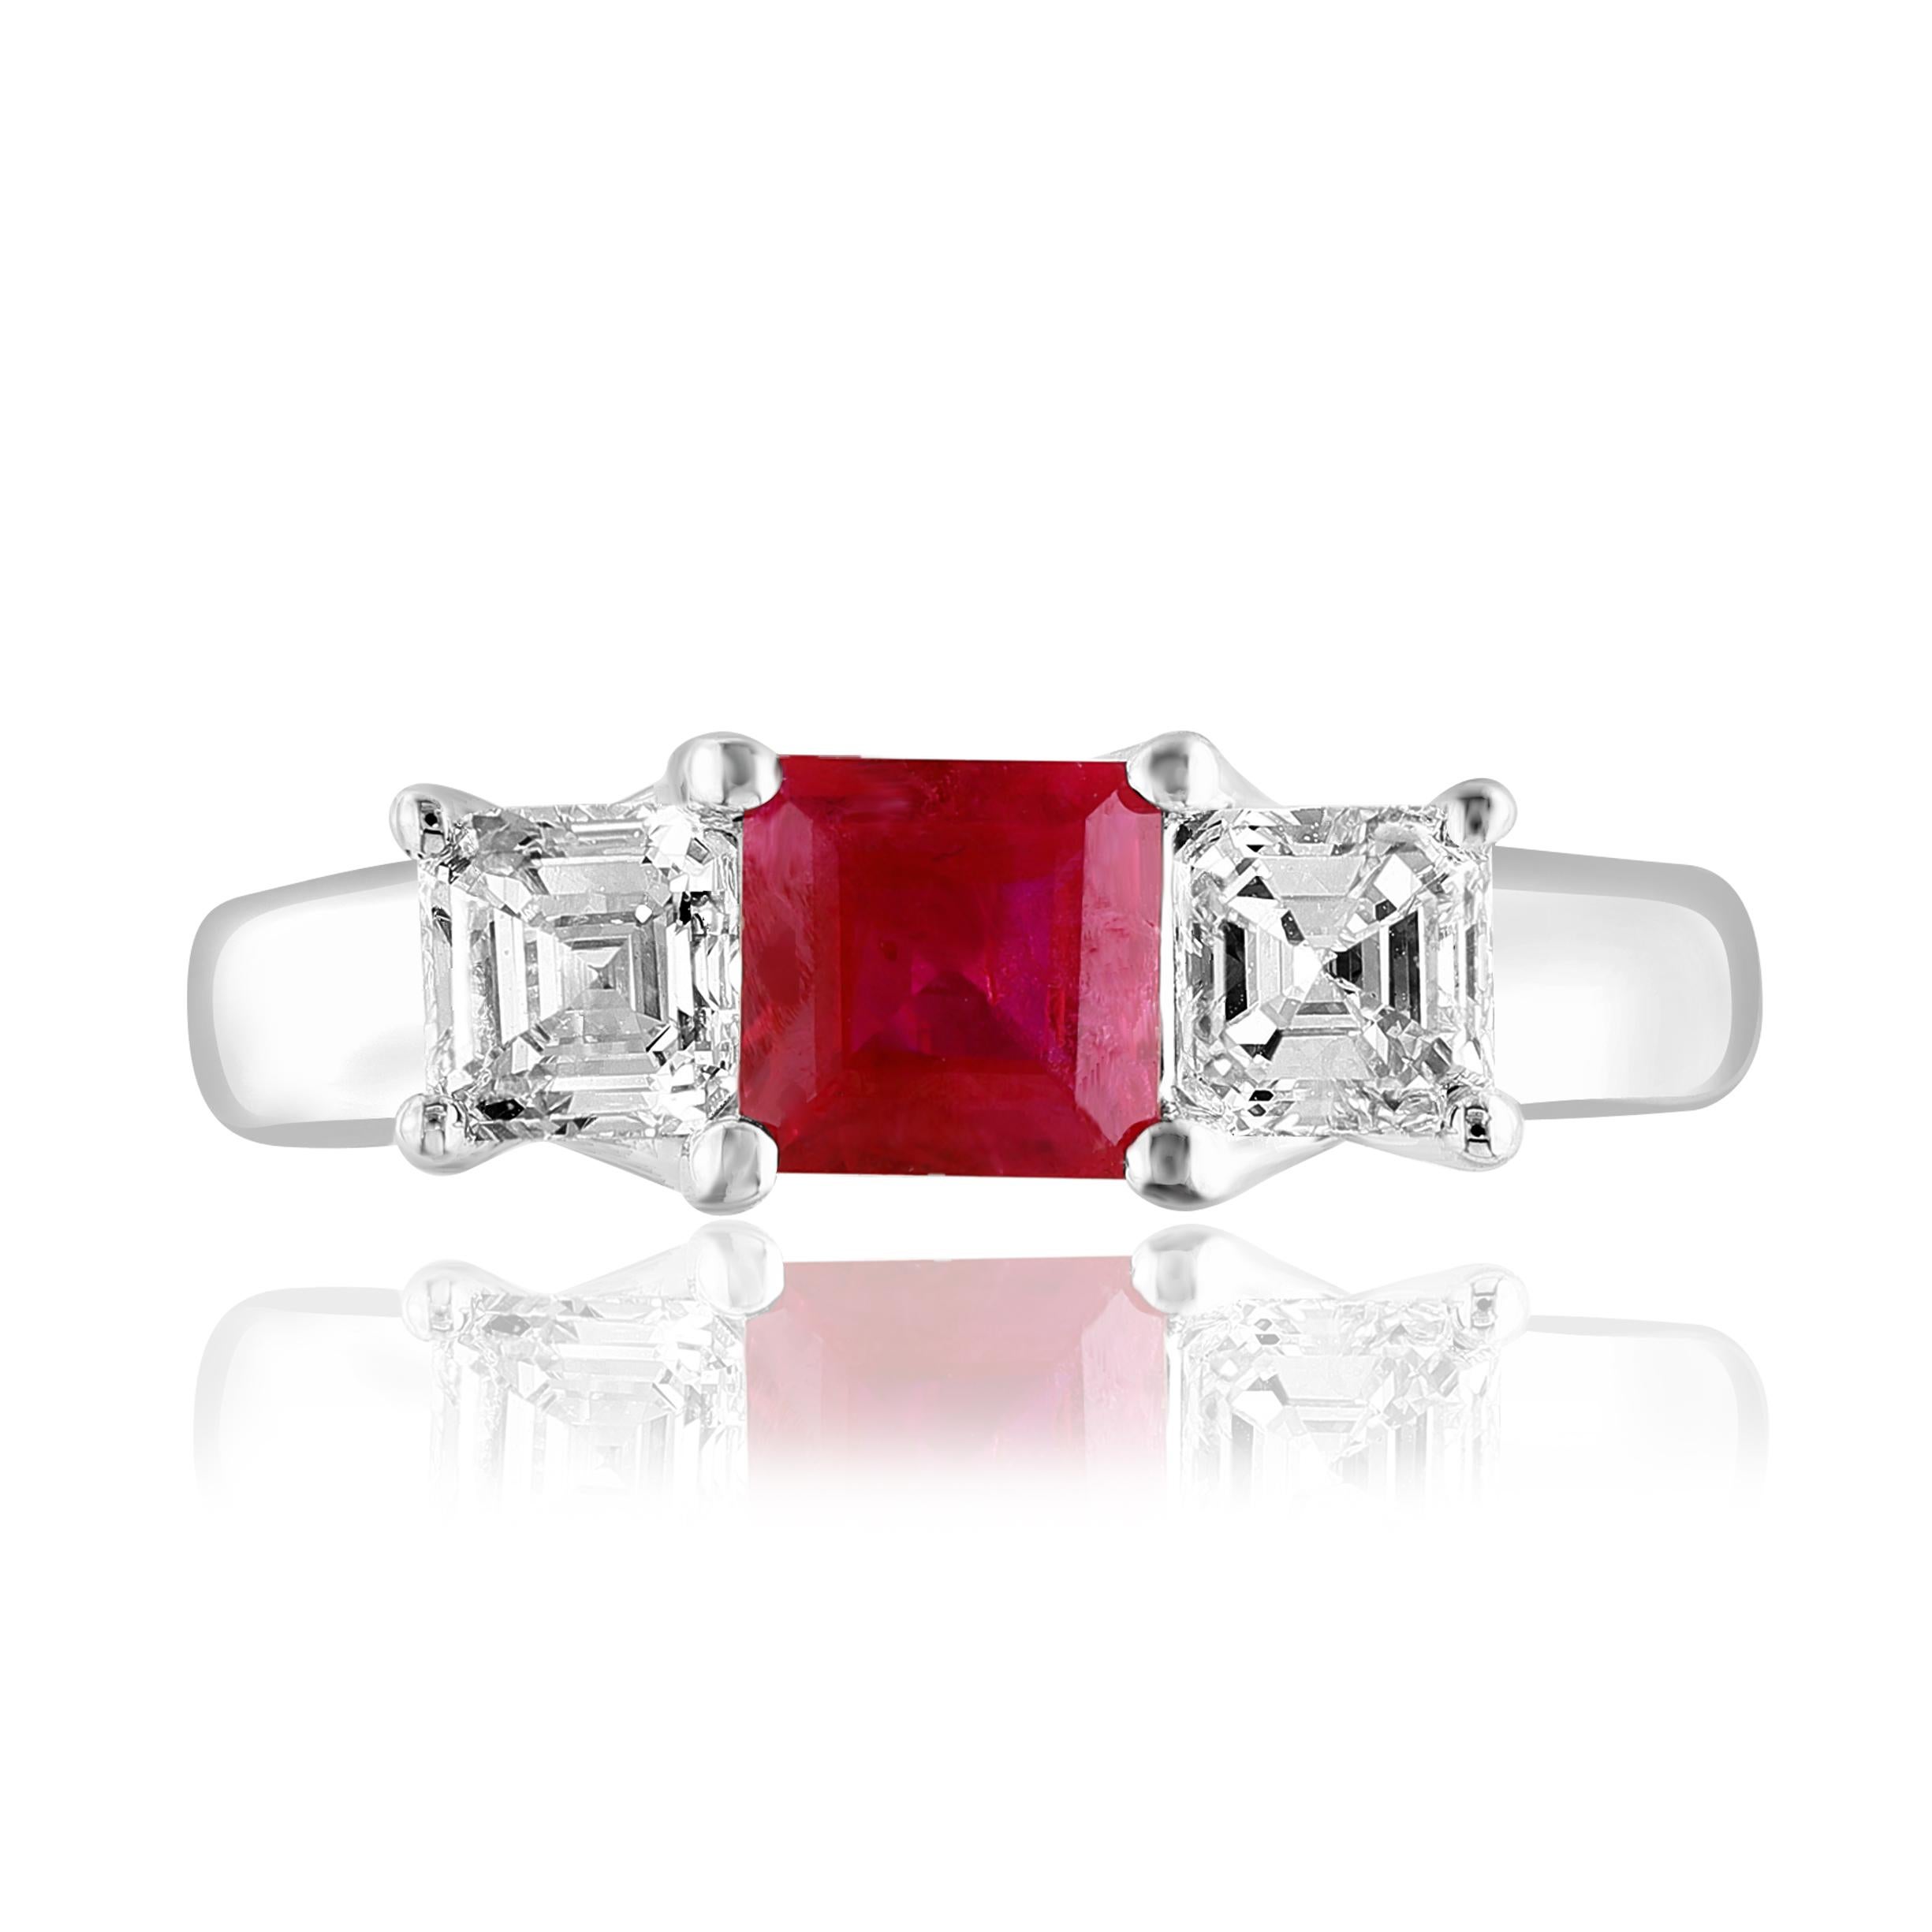 Showcasing Emerald cut, Vibrant color Ruby weighing 0.92 carats, flanked by two brilliant cut asher diamonds weighing 0.86 carats total. Elegantly set in a polished 14K White Gold.